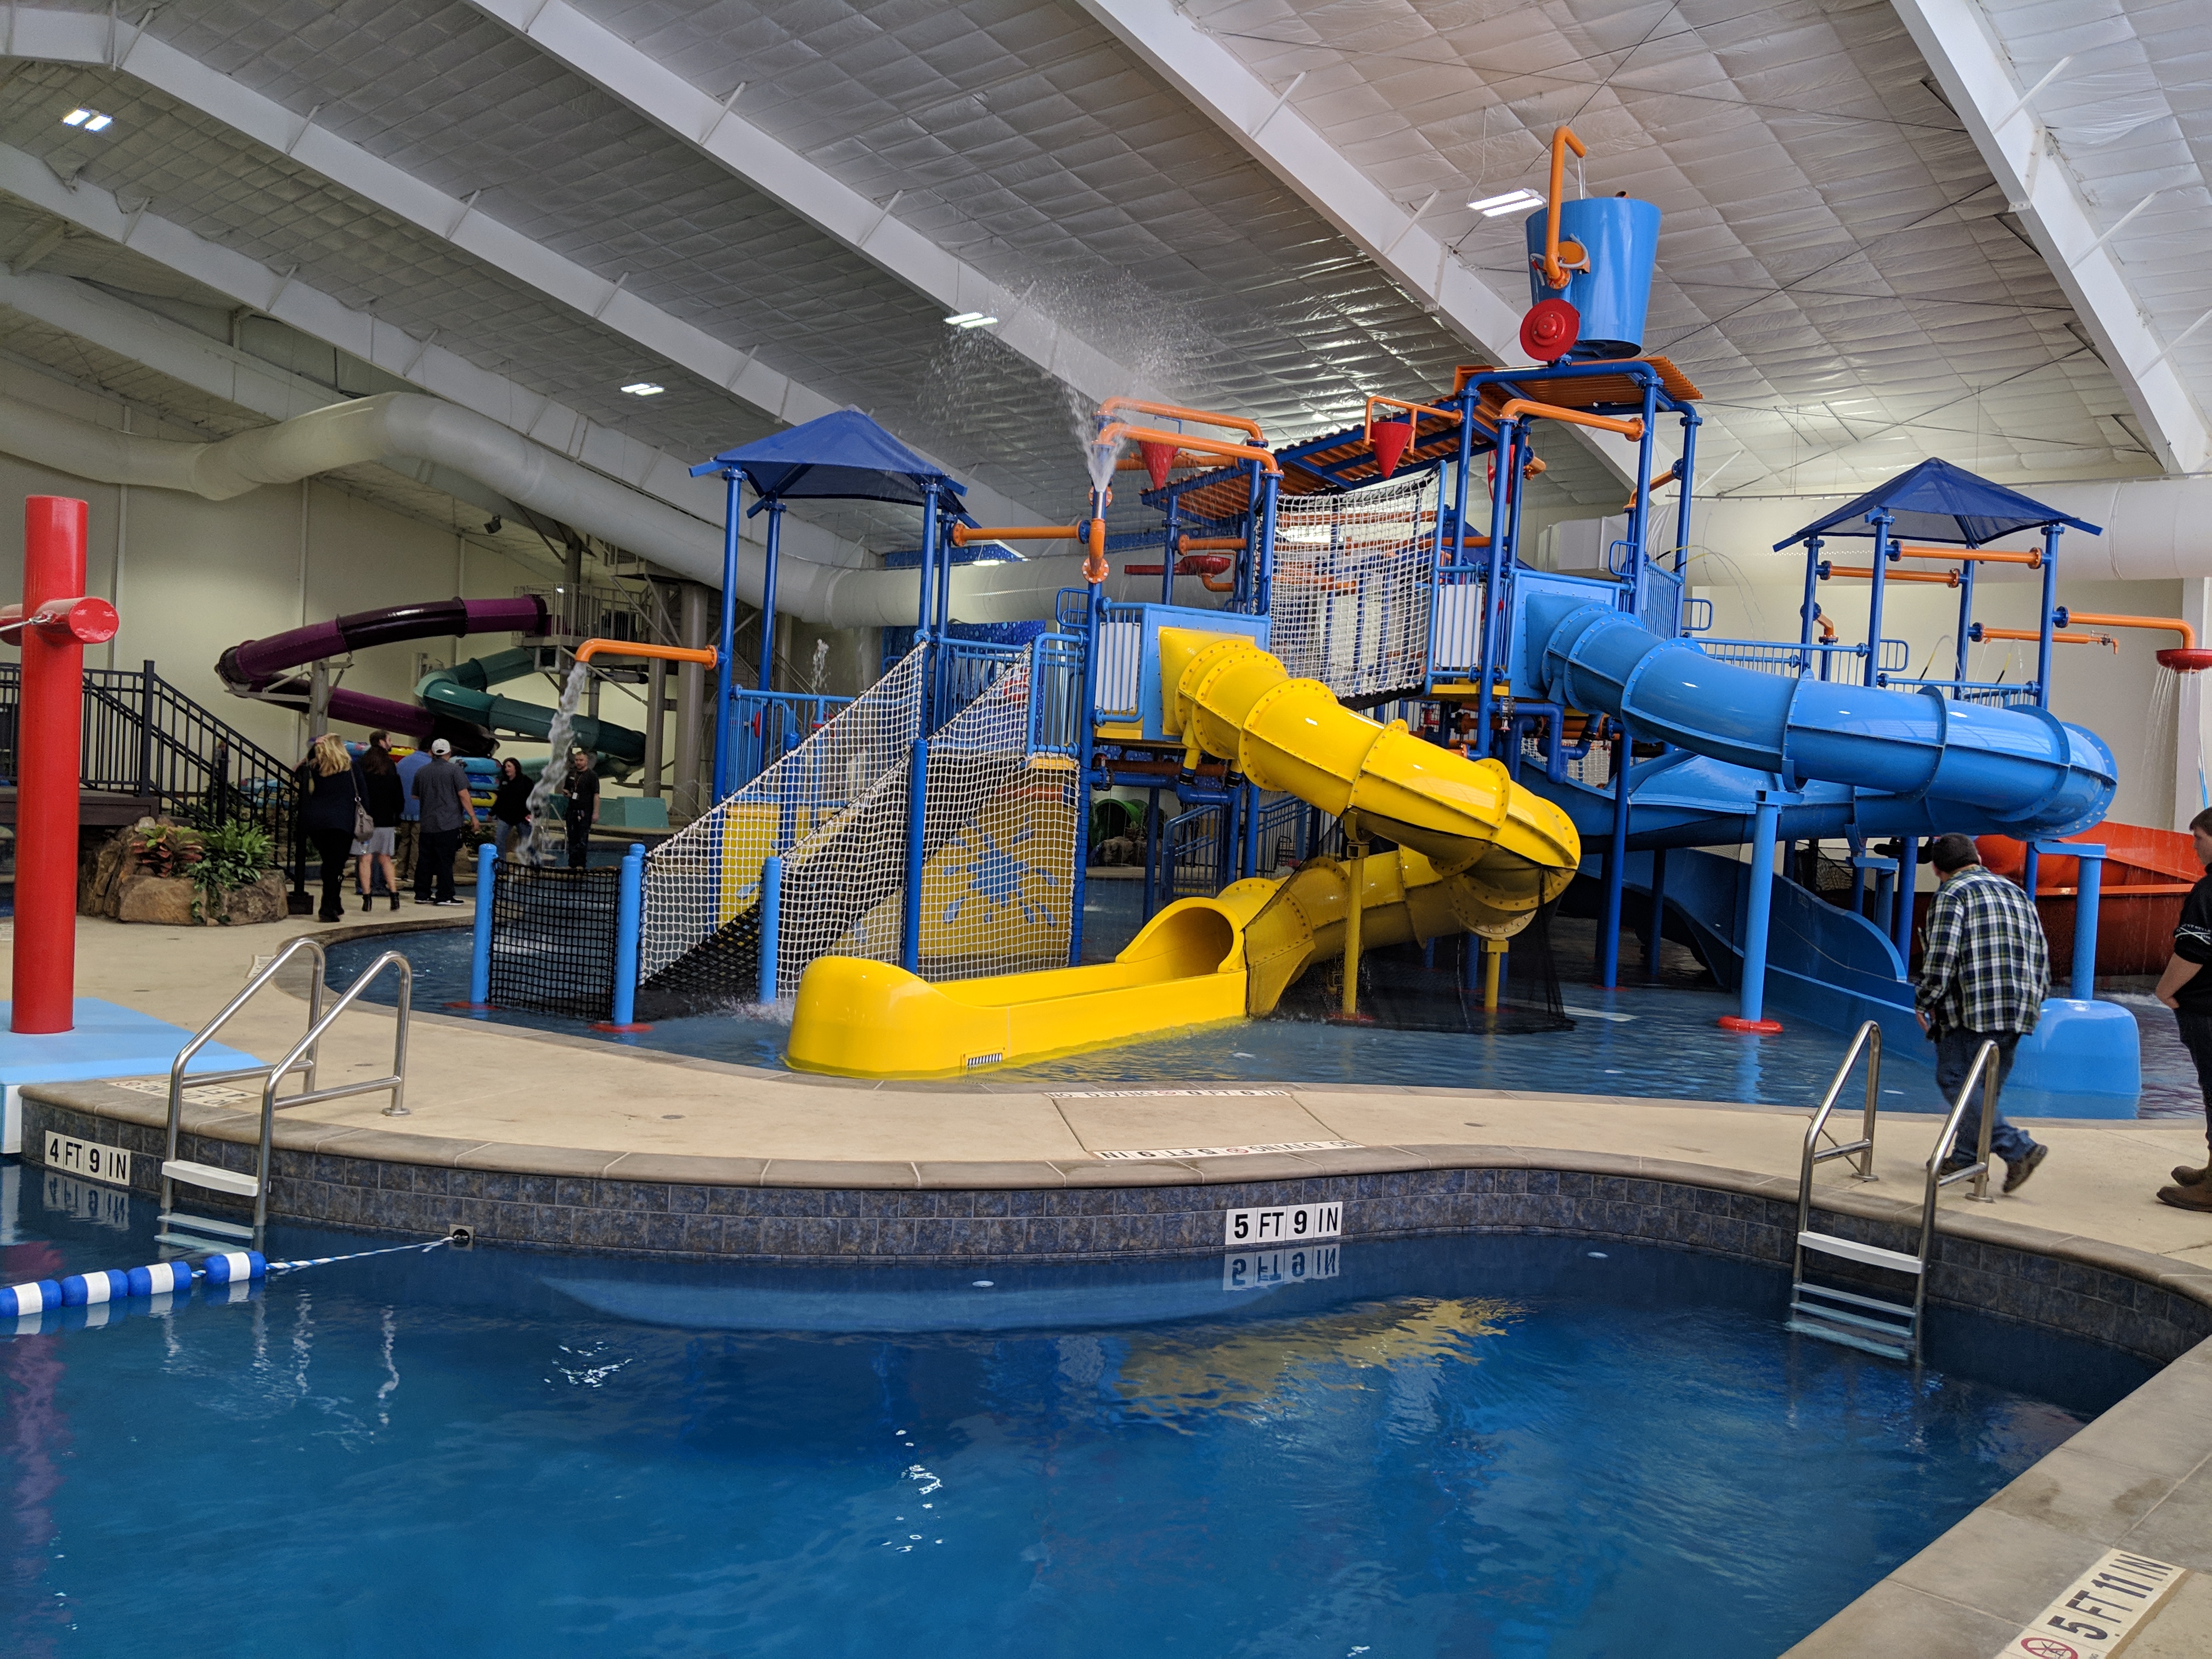 Seven Clans Indoor Water Park opening Monday for hotel guests